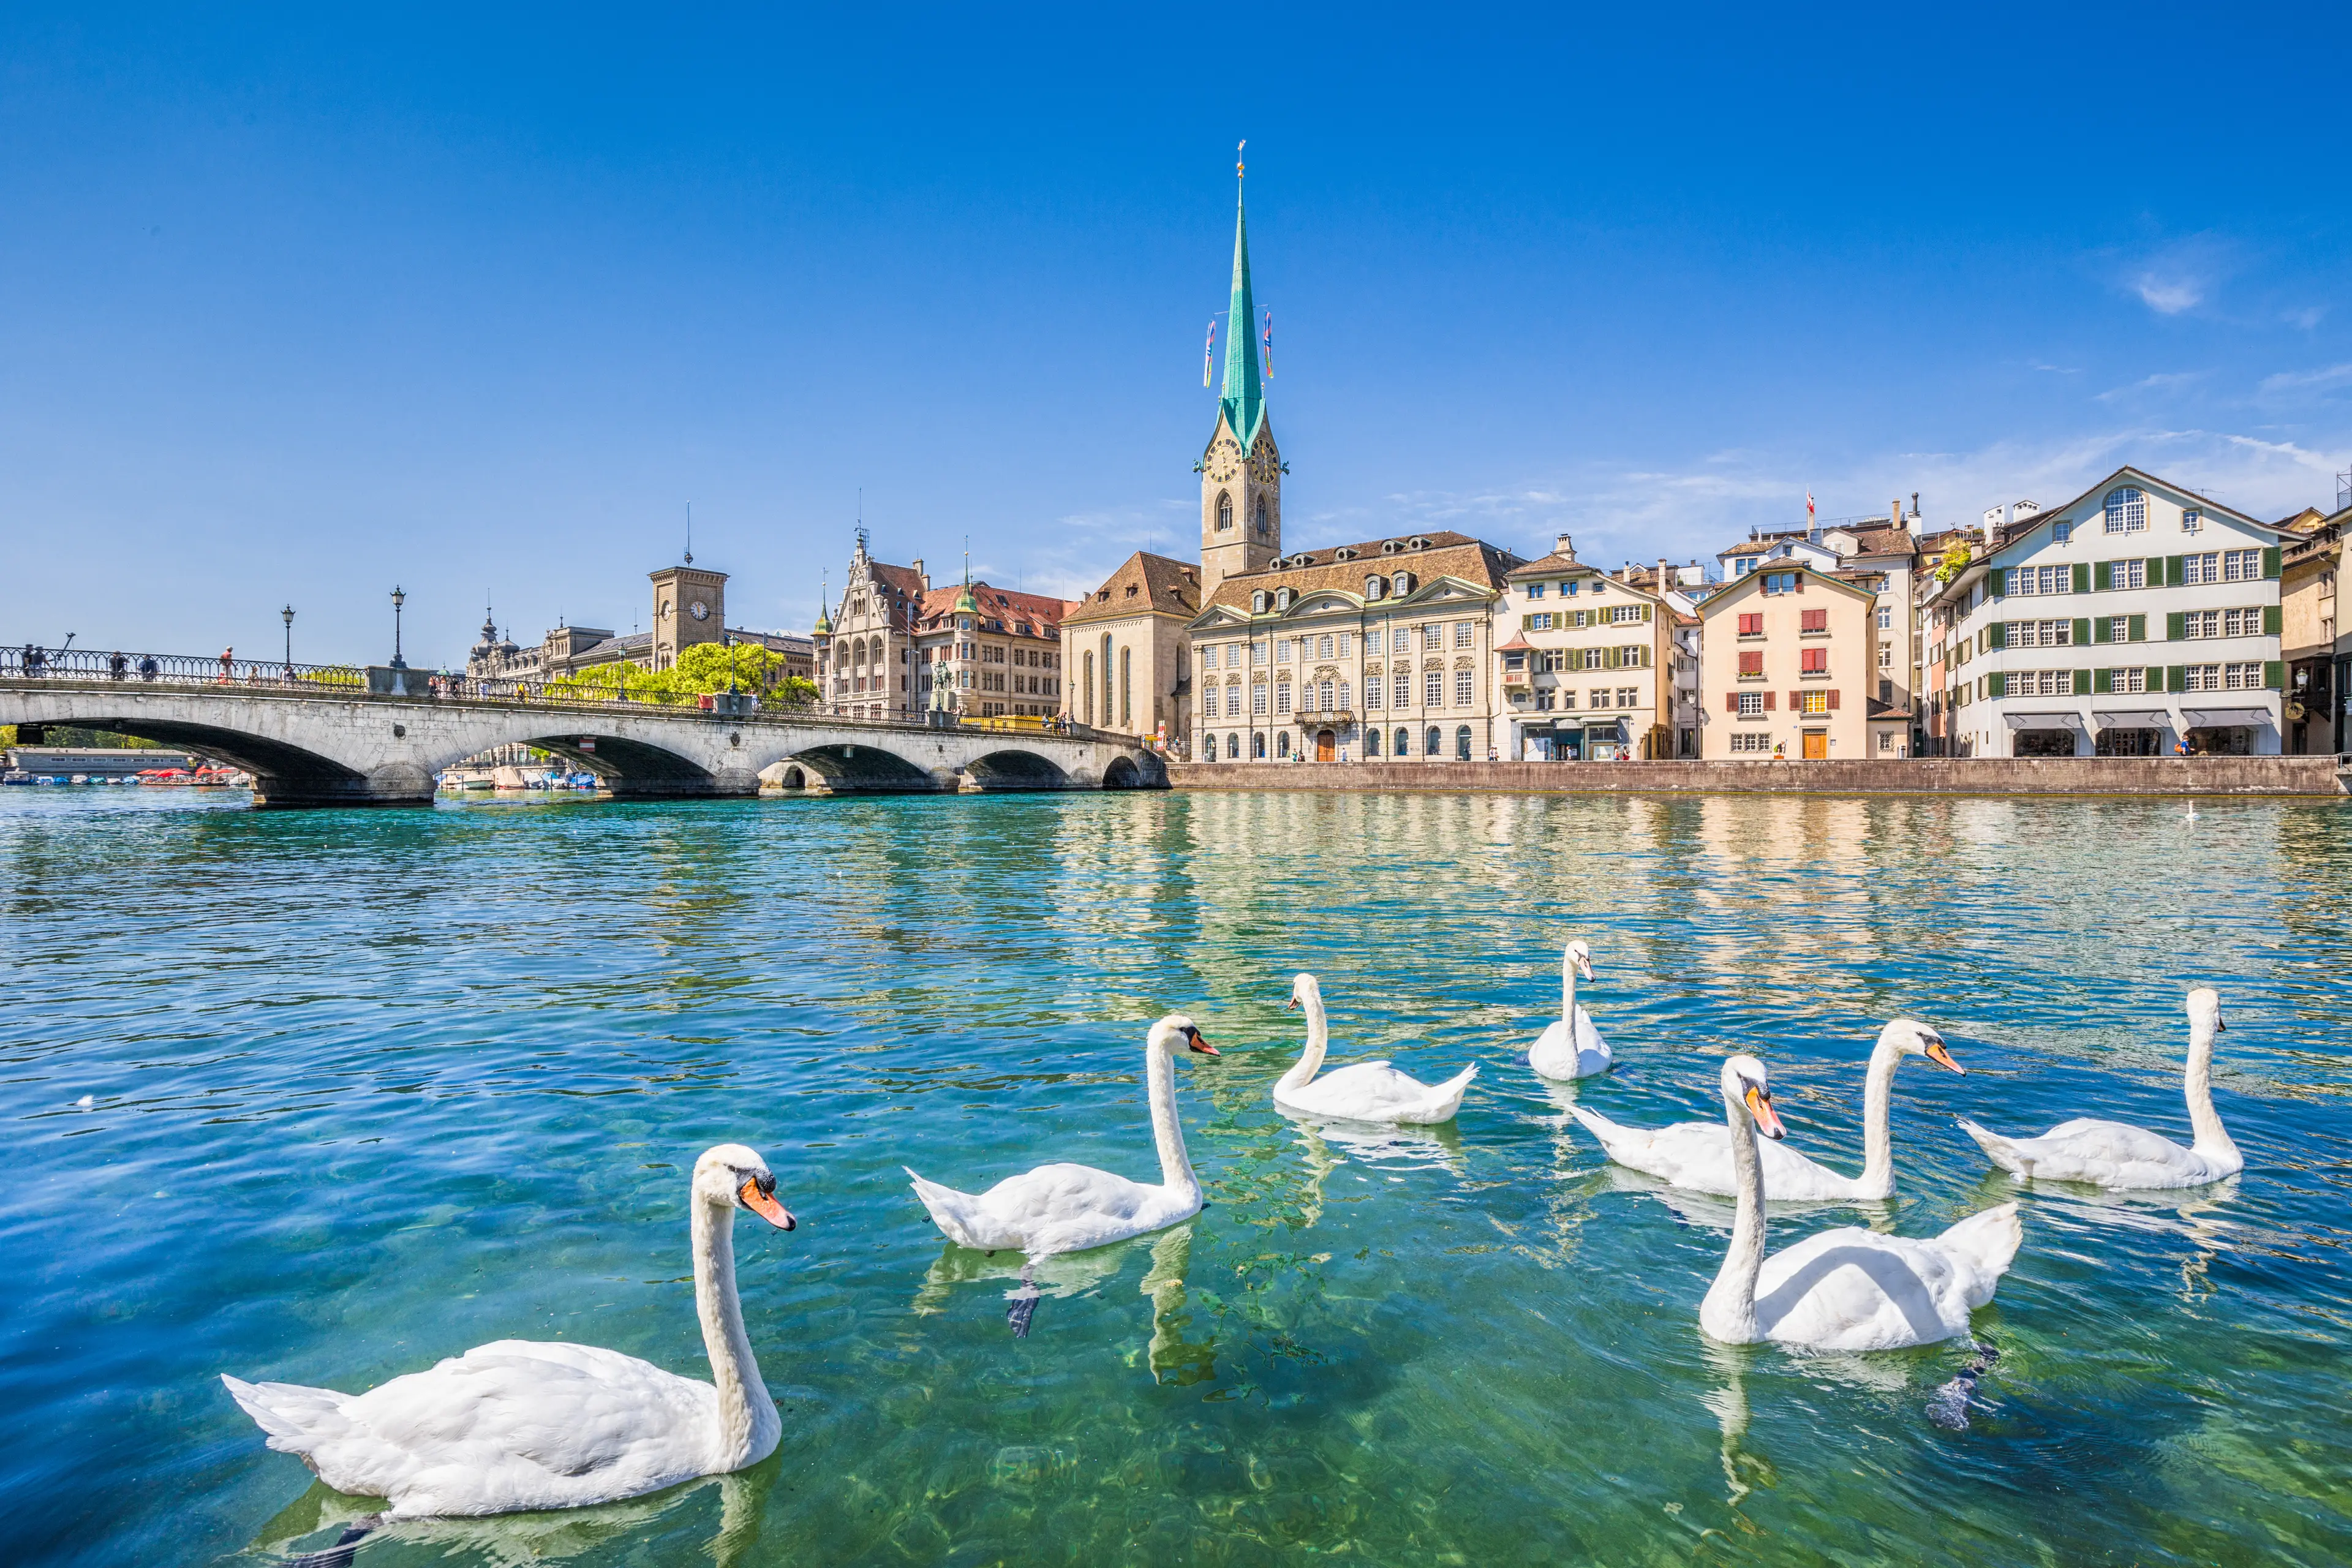 2-Day Adventure and Sightseeing Itinerary for Couples in Zurich